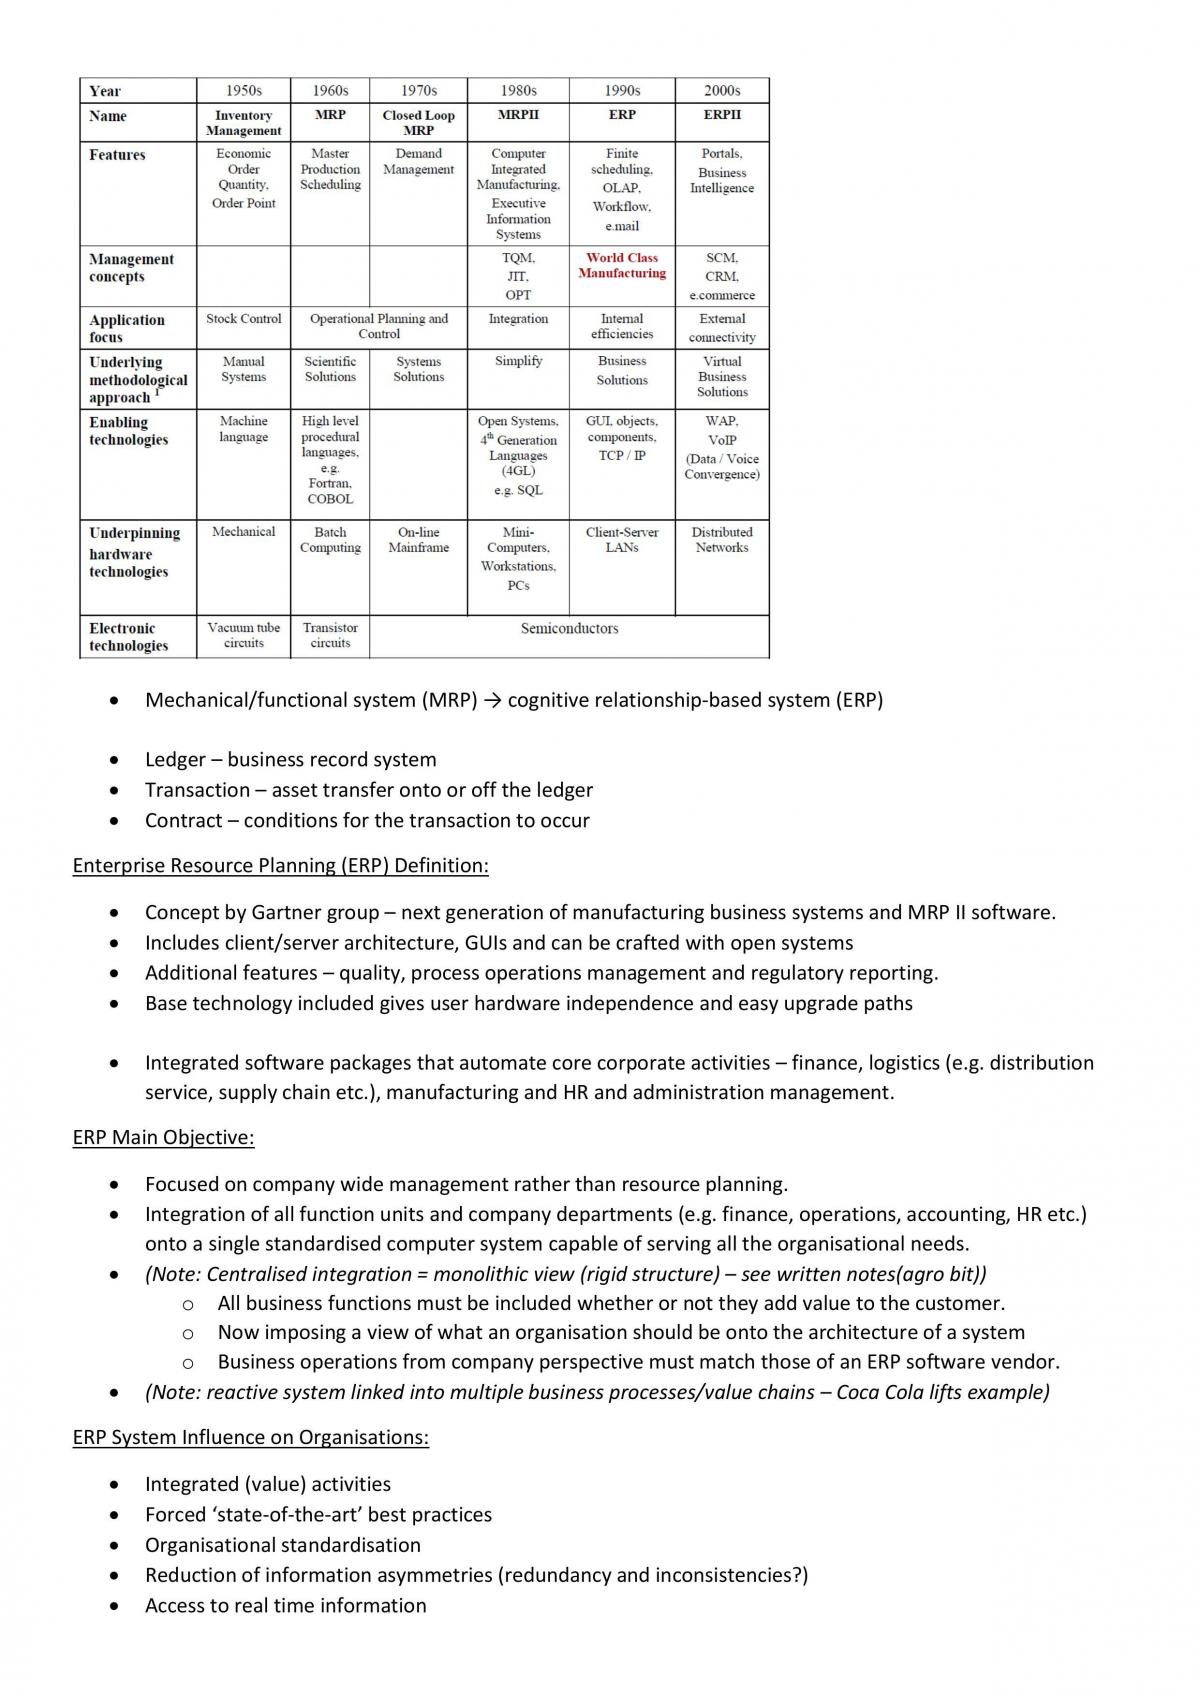 Supply chain management 4 - Summary - Page 13